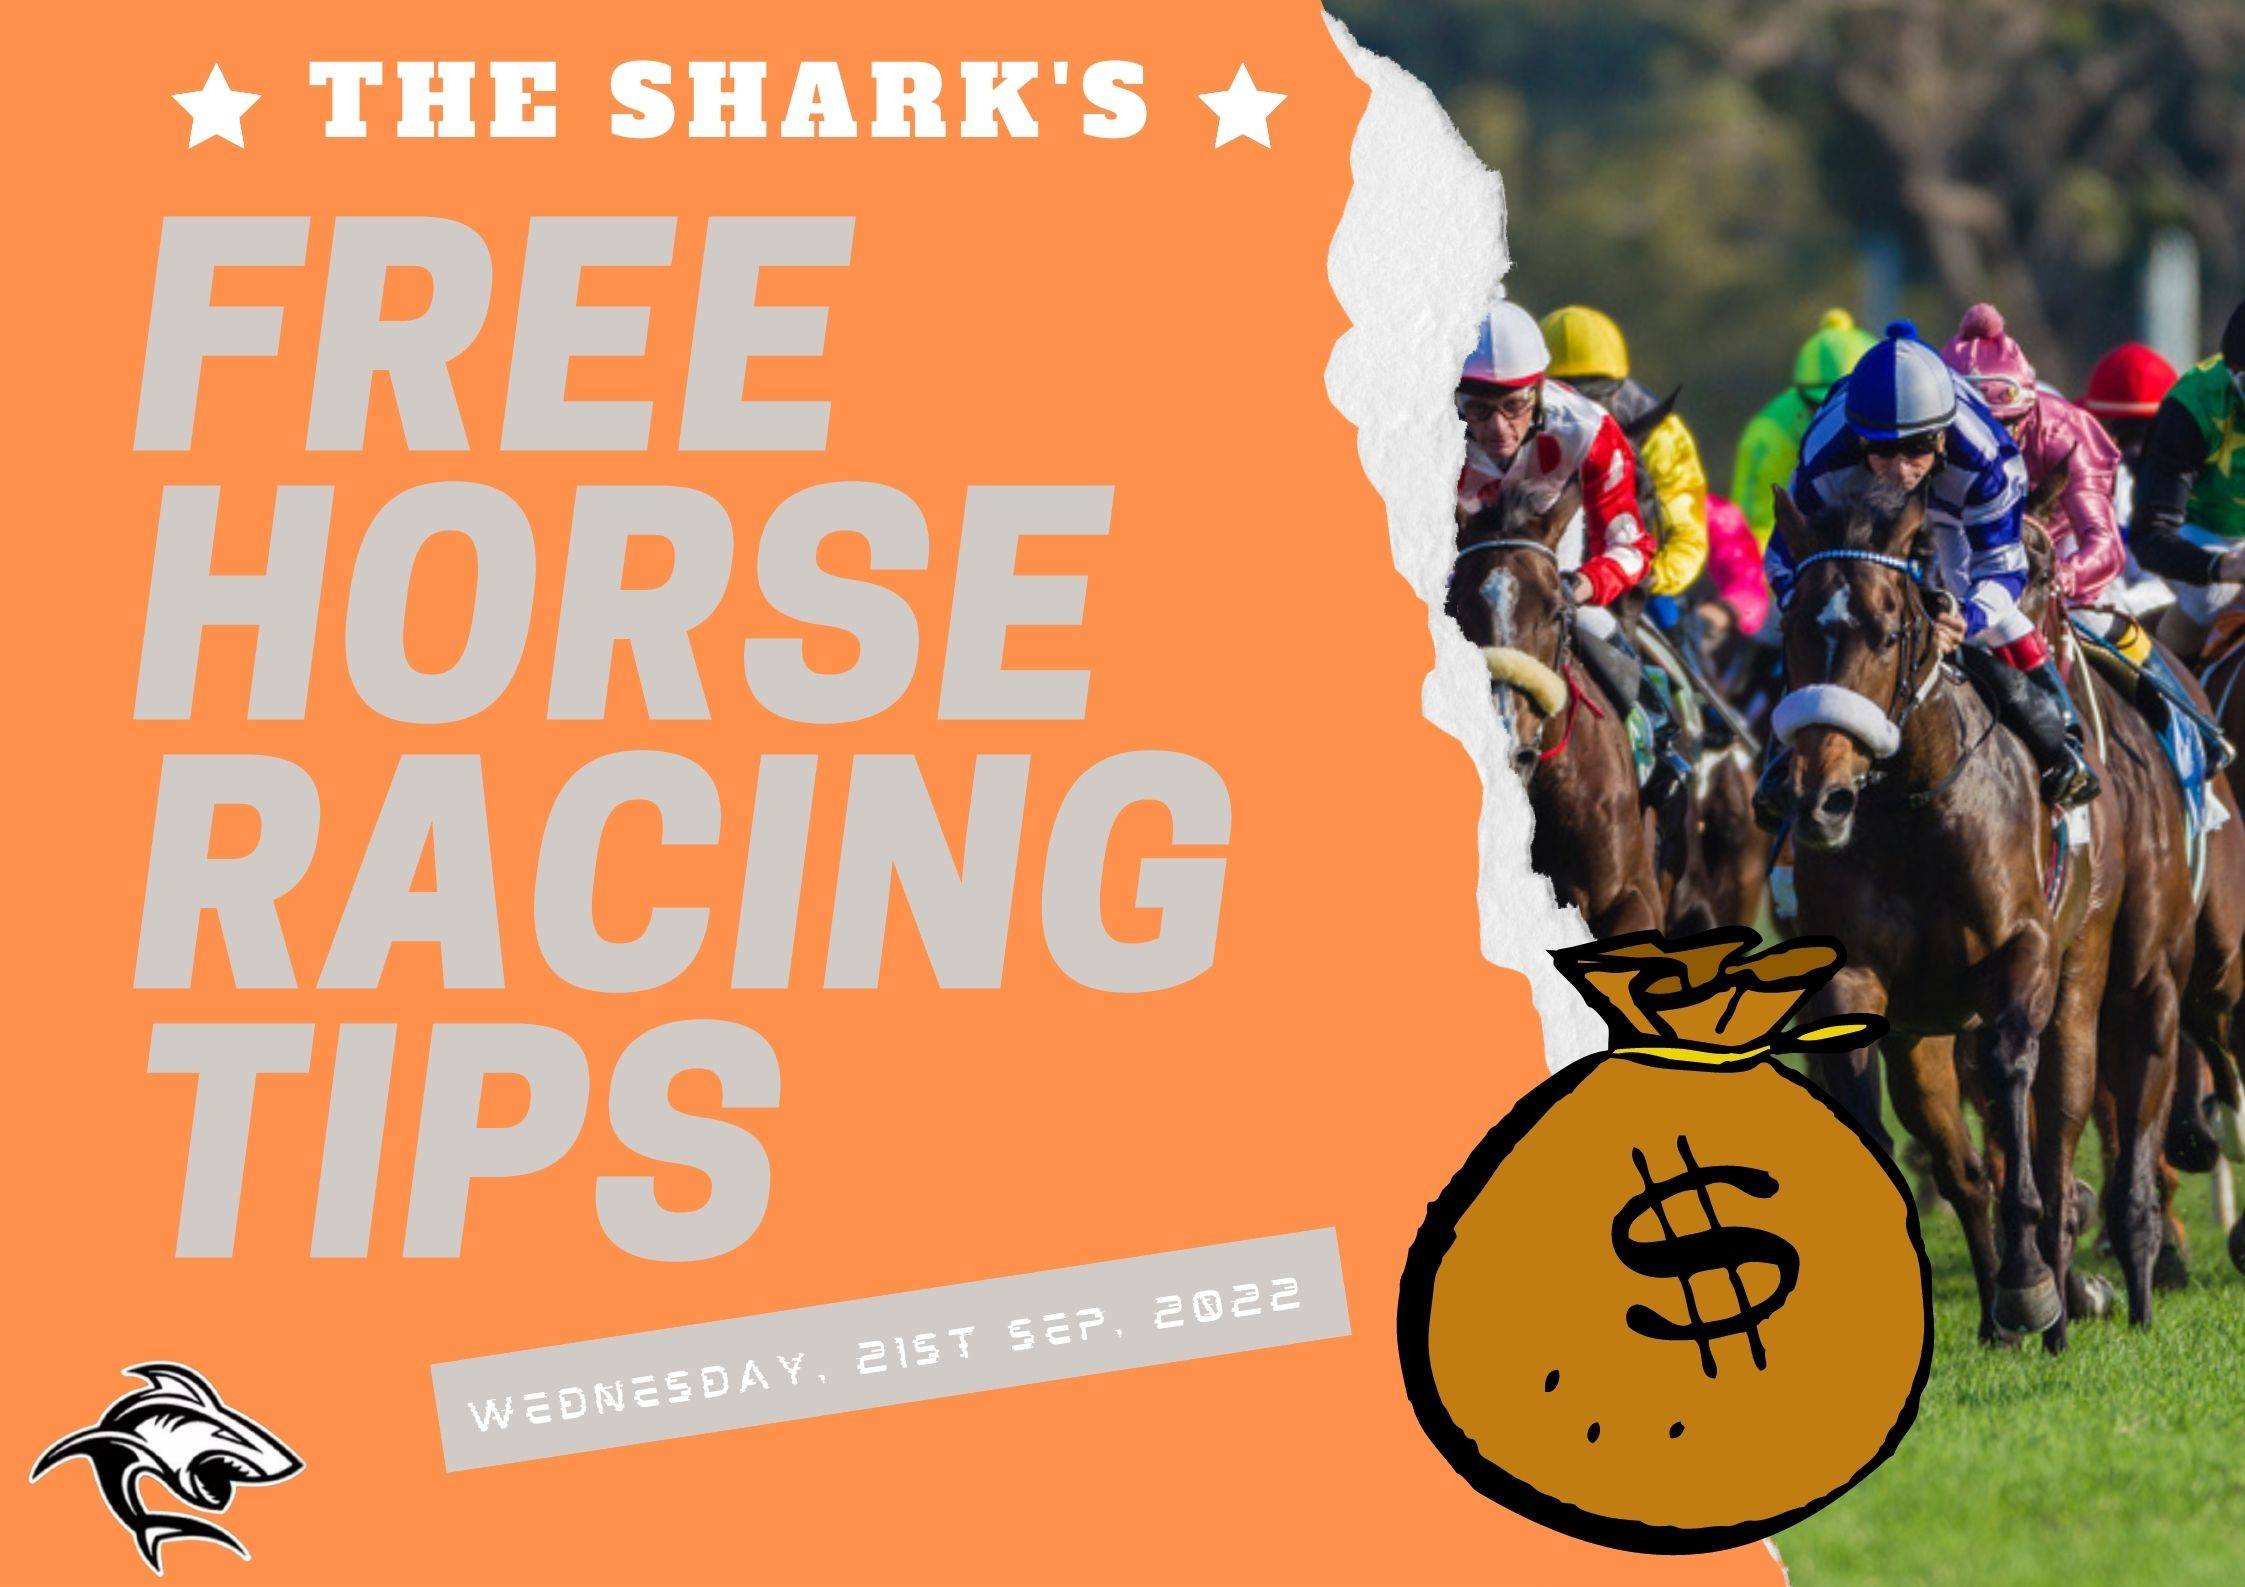 Free Horse Racing Tips - 21st Sep